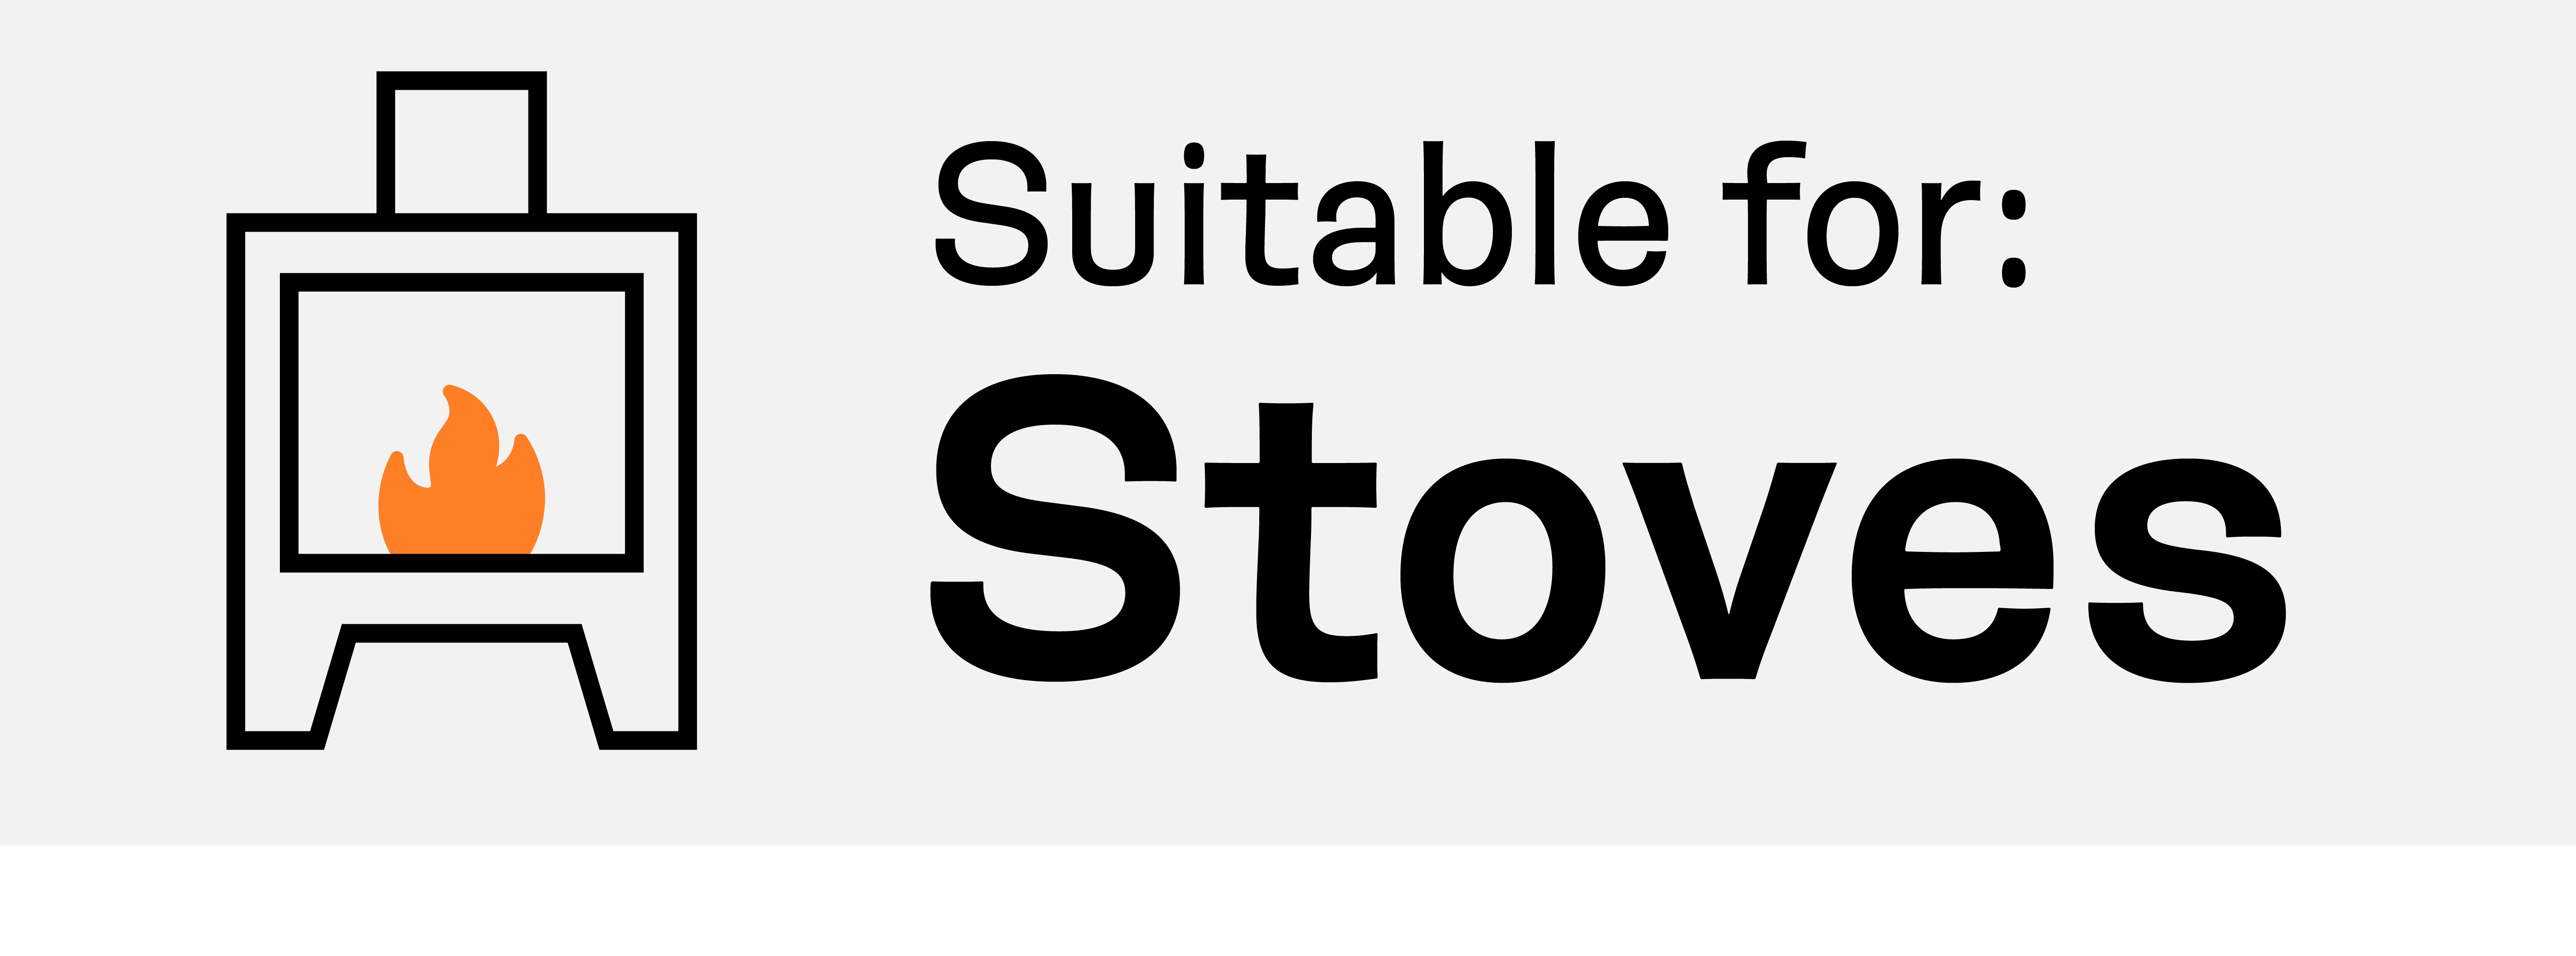 Suitable for Stoves